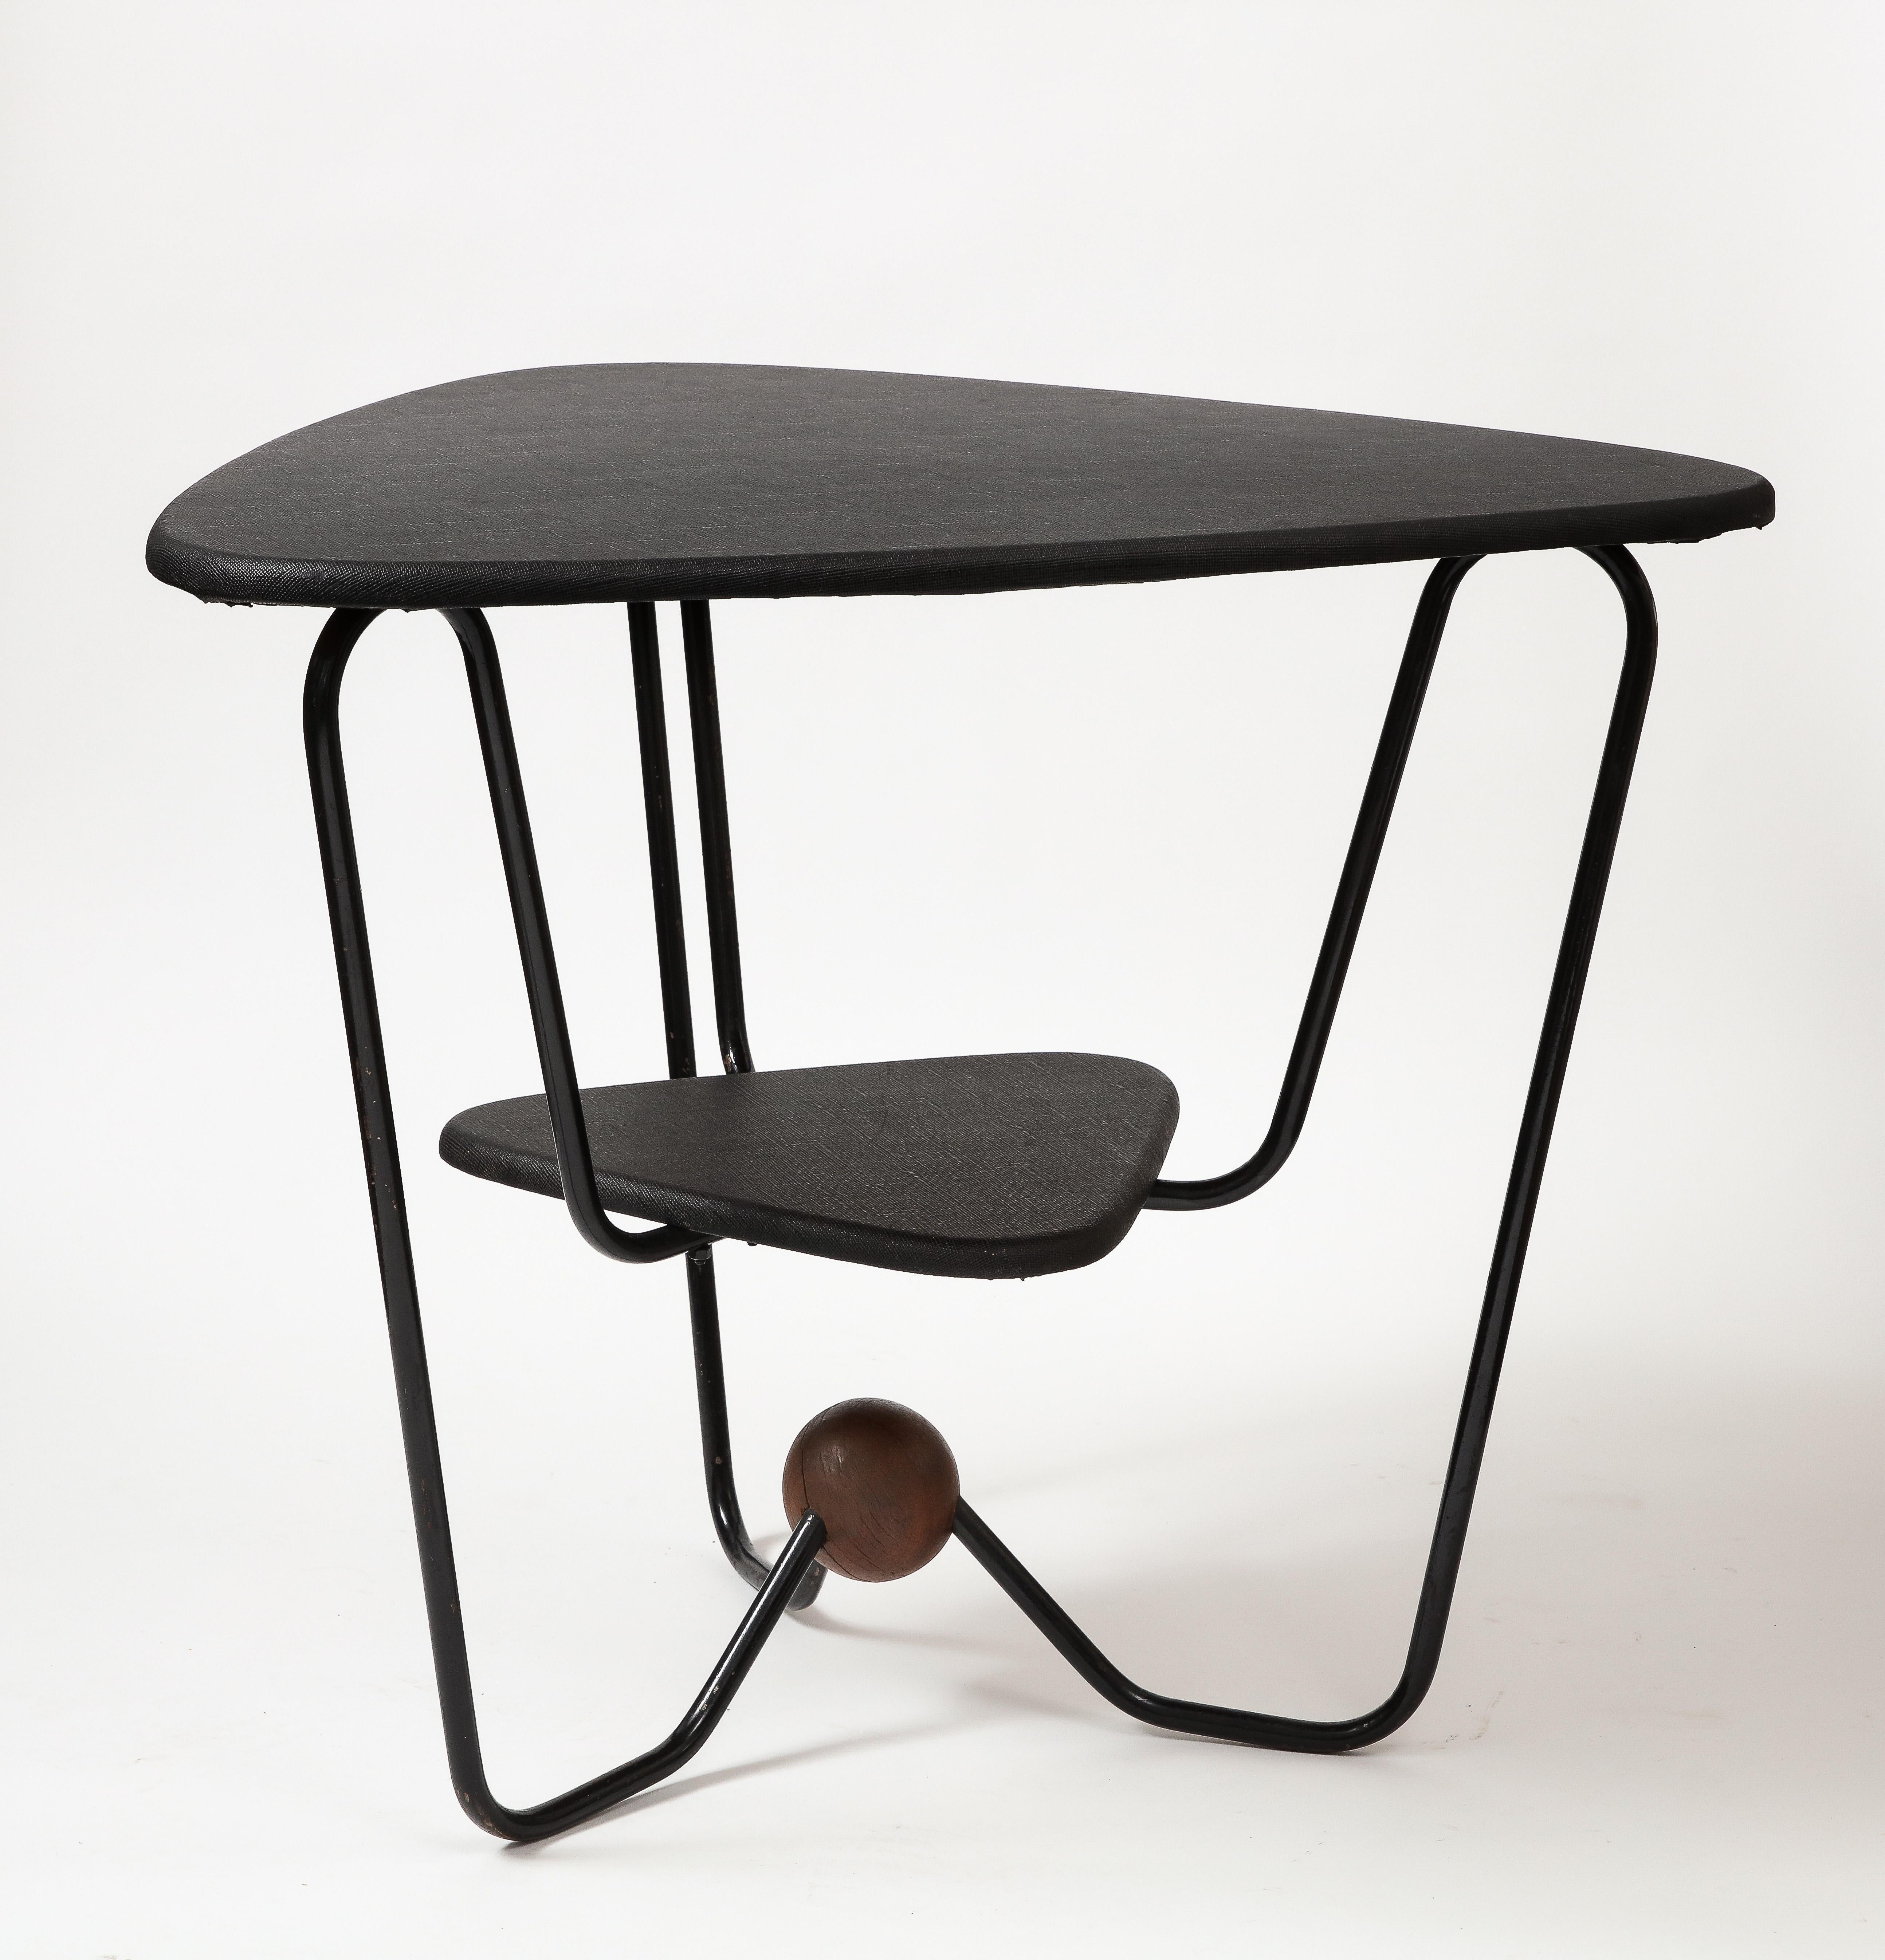 Triangular Steel, Walnut, and Textile Side Table, Italy, c. 1960 For Sale 1